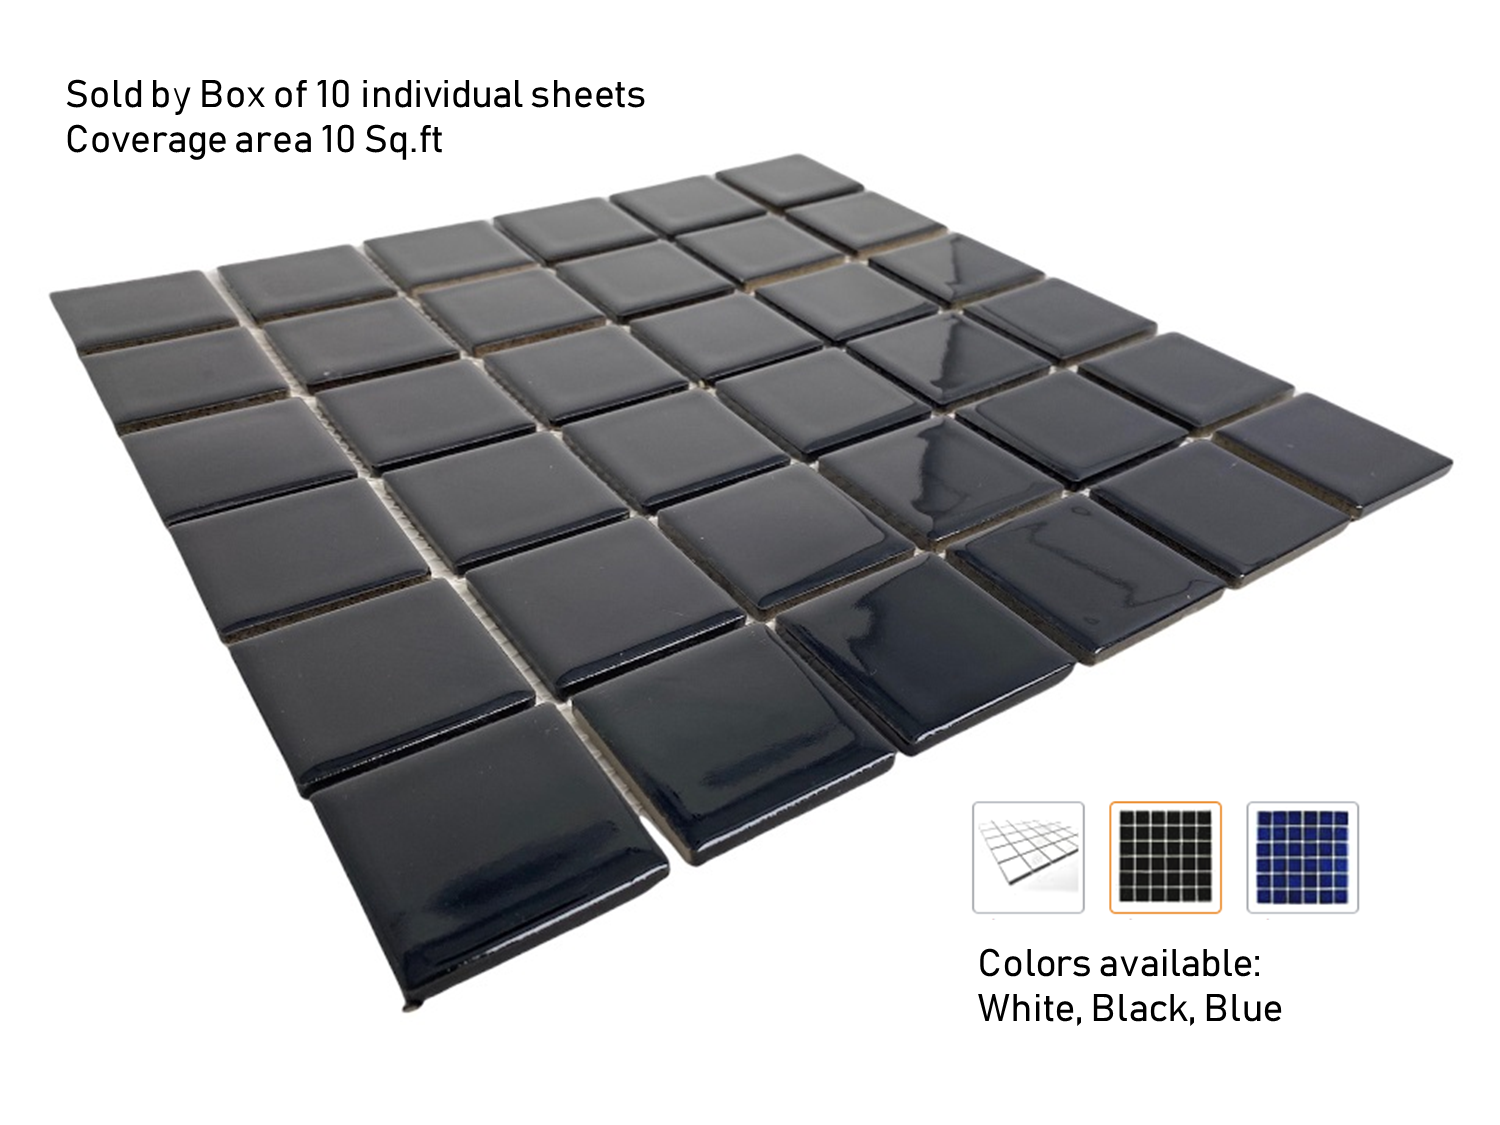 Tenedos Premium Quality 2" (Exact Size 1-15/16 in.) Black Porcelain Square Mosaic Tile Shiny Look Designed in Italy (12x12) for Kitchen Backsplash, Pool Tile, Bathroom Wall, Accent Wall